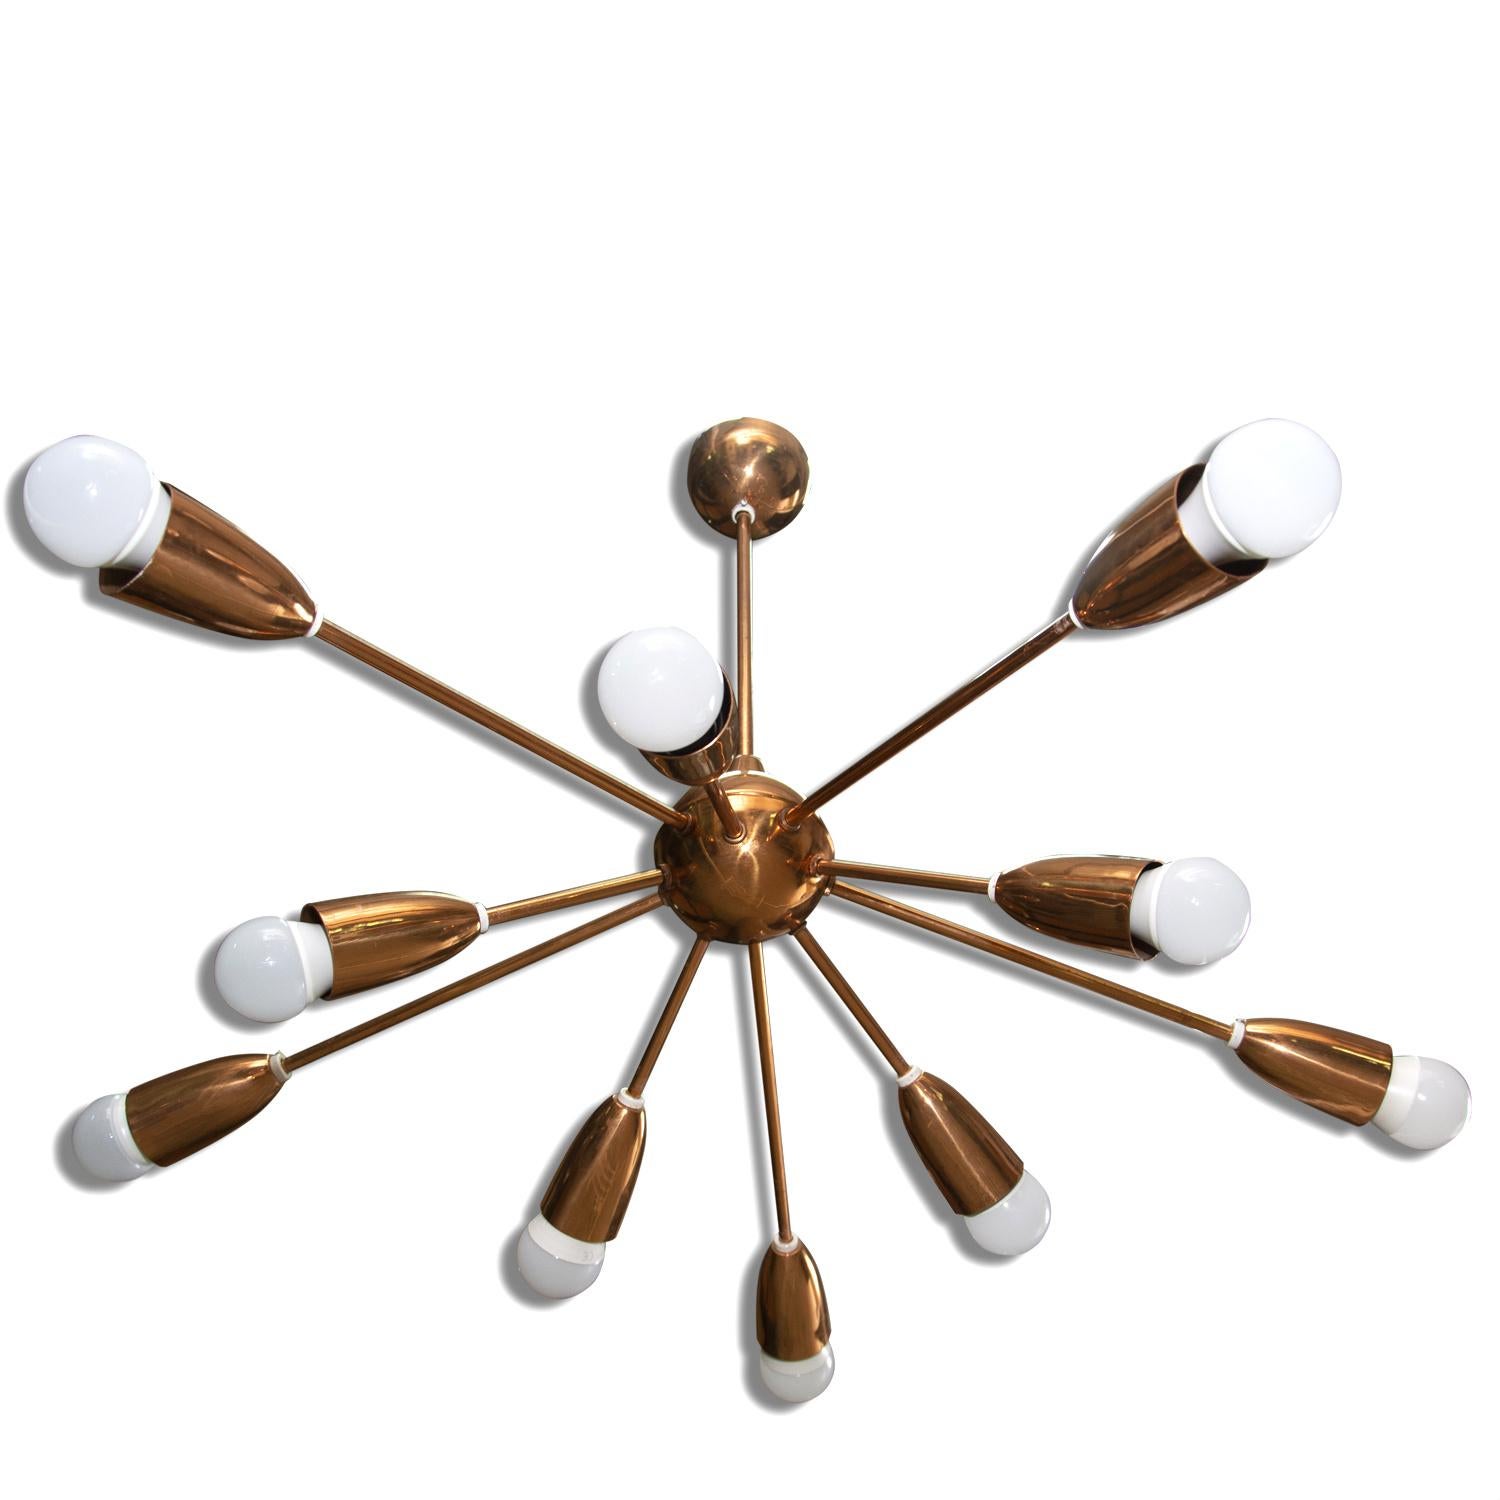 This Space Age copper Sputnik chandelier was made in Italy in the 1960s. It features 10 copper arms. The chandelier is in very good vintage condition, new wiring. 

